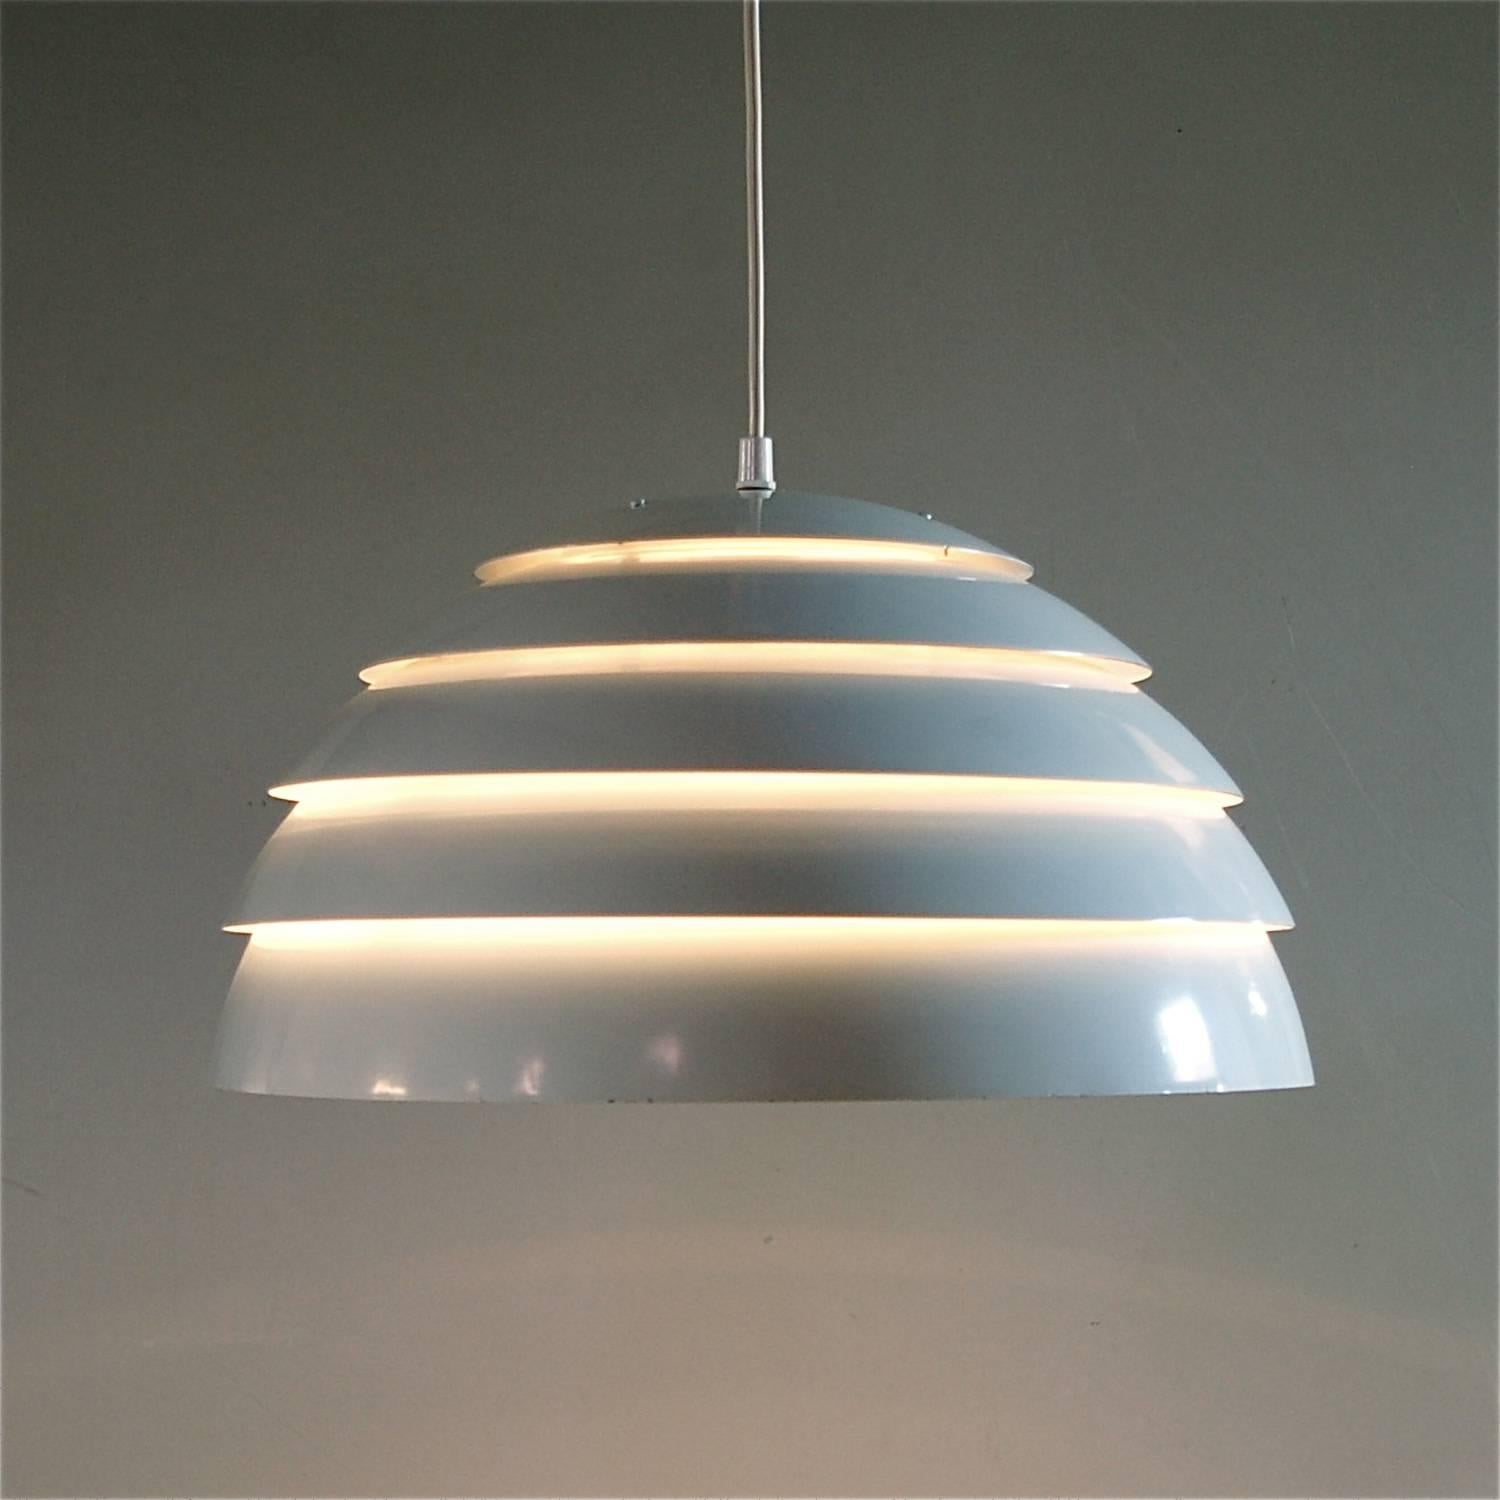 Dome or demilune in shape, this white aluminum pendant, hanging lamp is constructed from overlapping circular layers of powder coated aluminium graduating in seize. The shade also has a white interior and a smaller black inner shade which diffuses